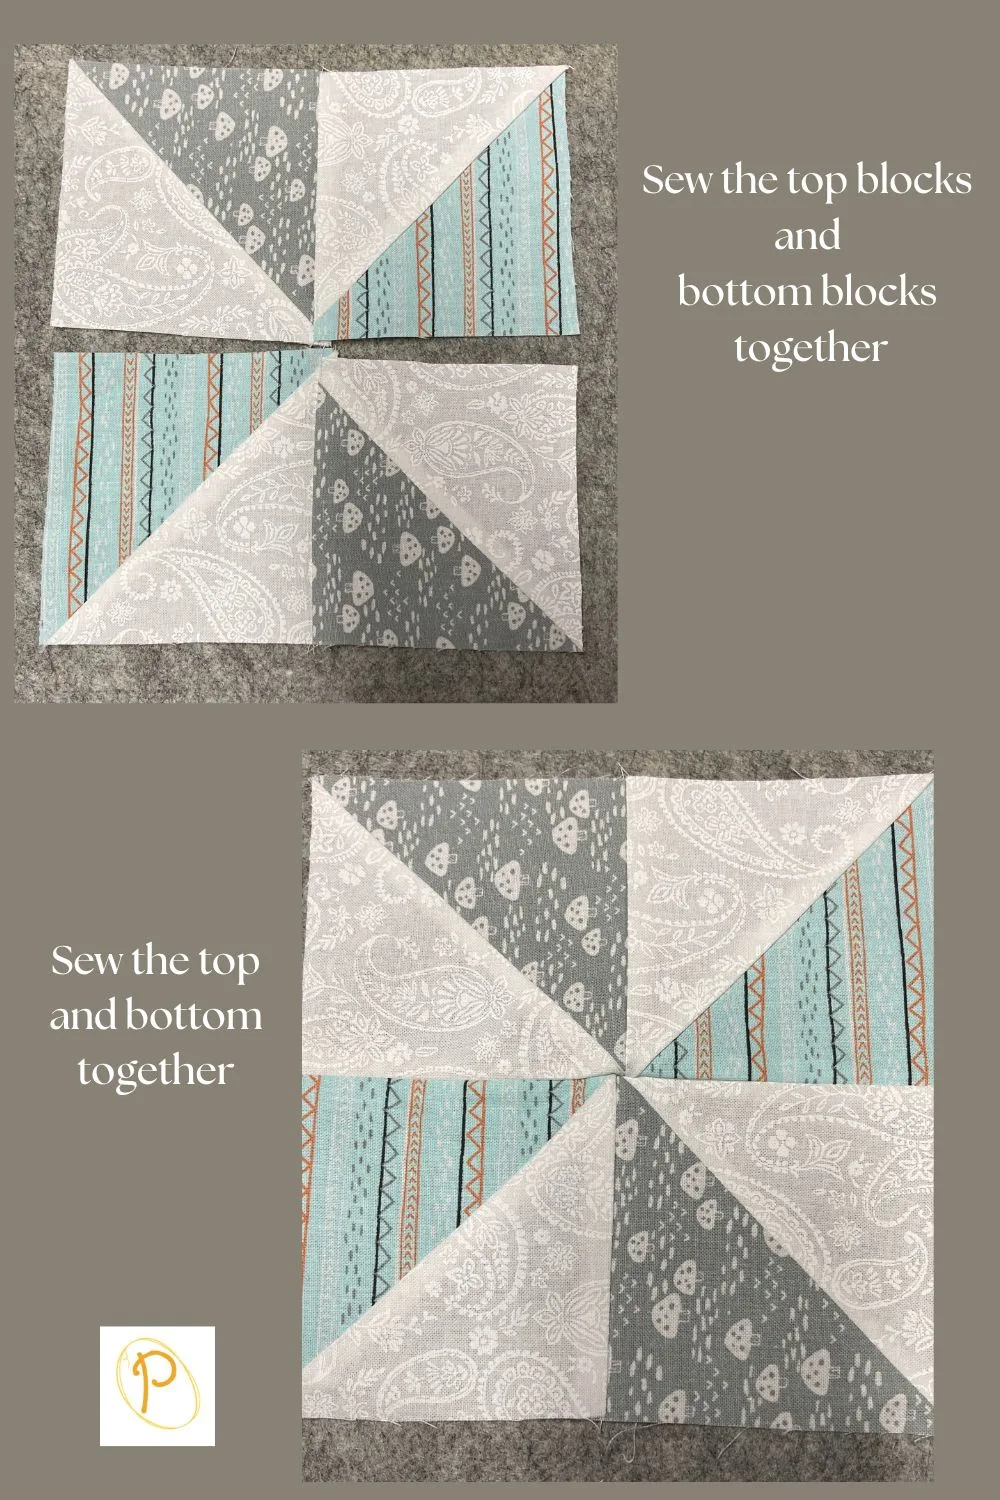 Sew the top blocks and bottom blocks together